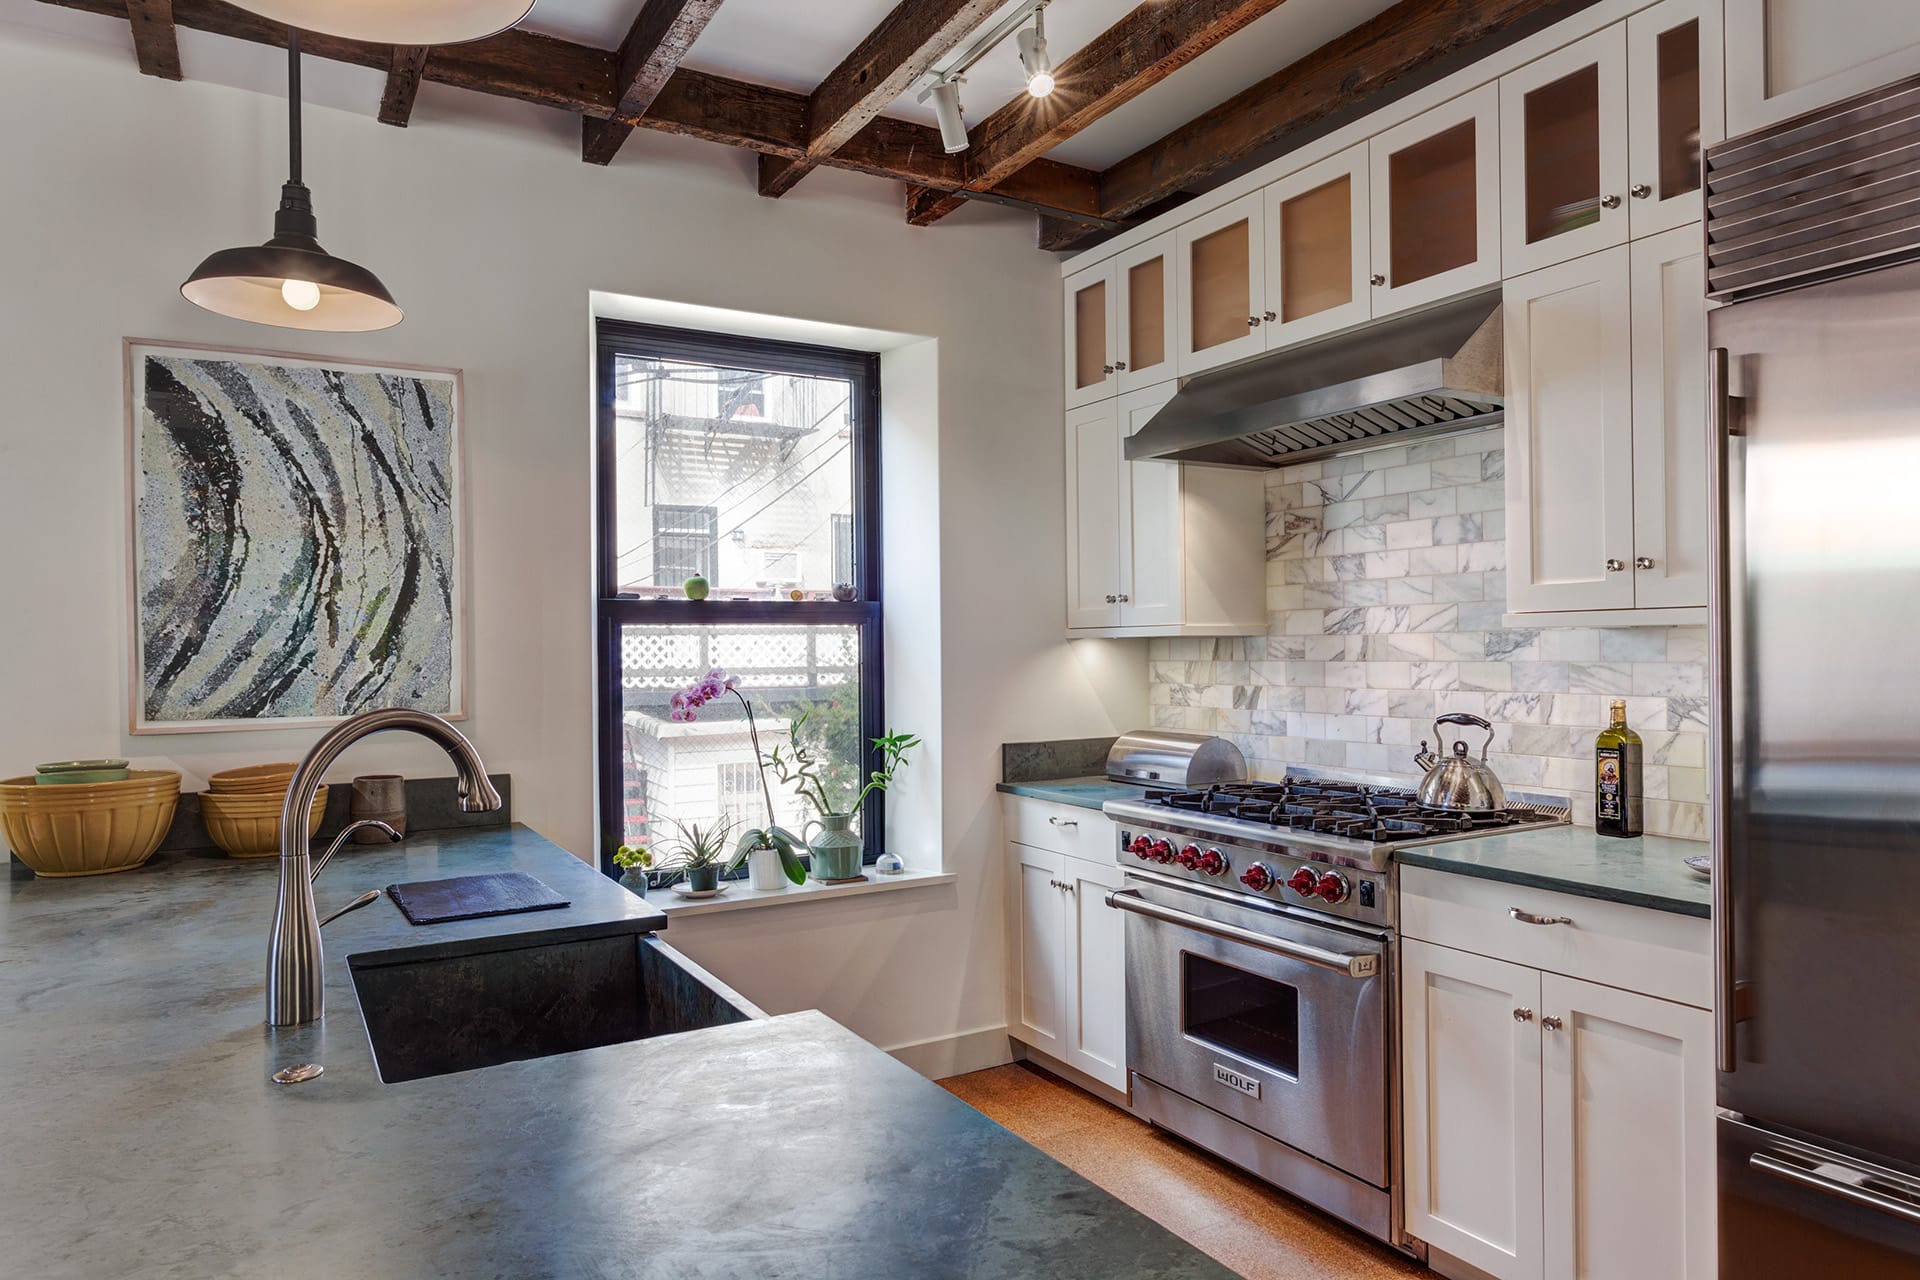 Renovated kitchen in a carriage house with blue countertops, stainless steel appliances, white cabinetry, and exposed ceiling beams.